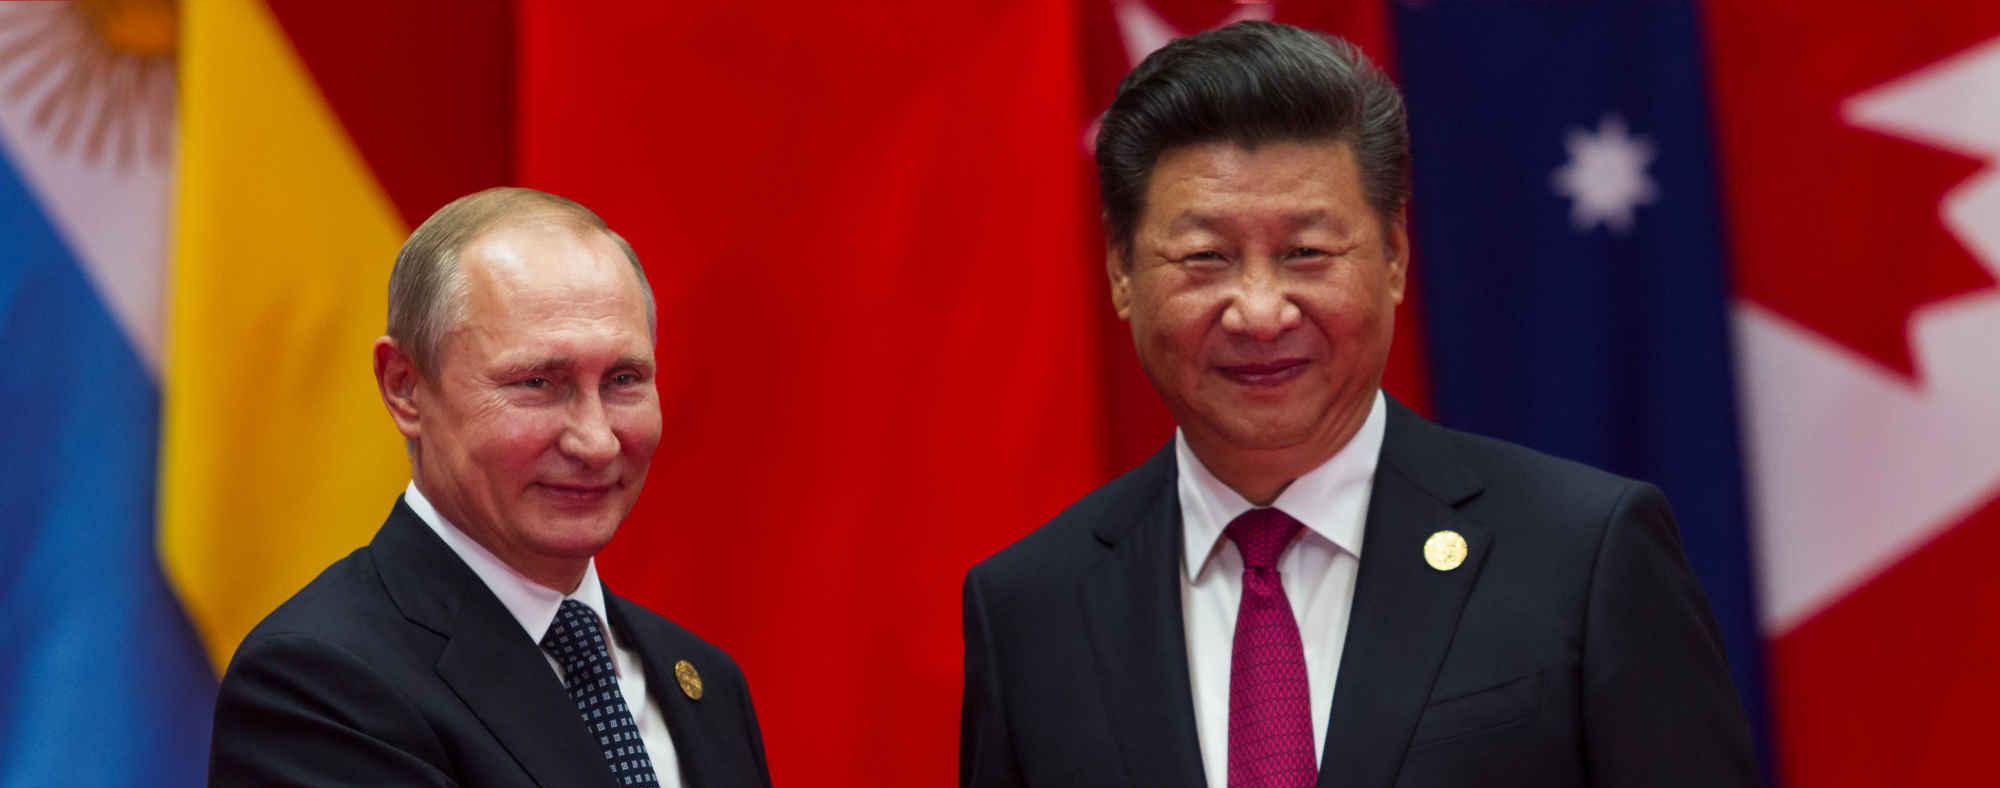 The China- Russia ‘No Limits’ Partnership Is Still Going Strong